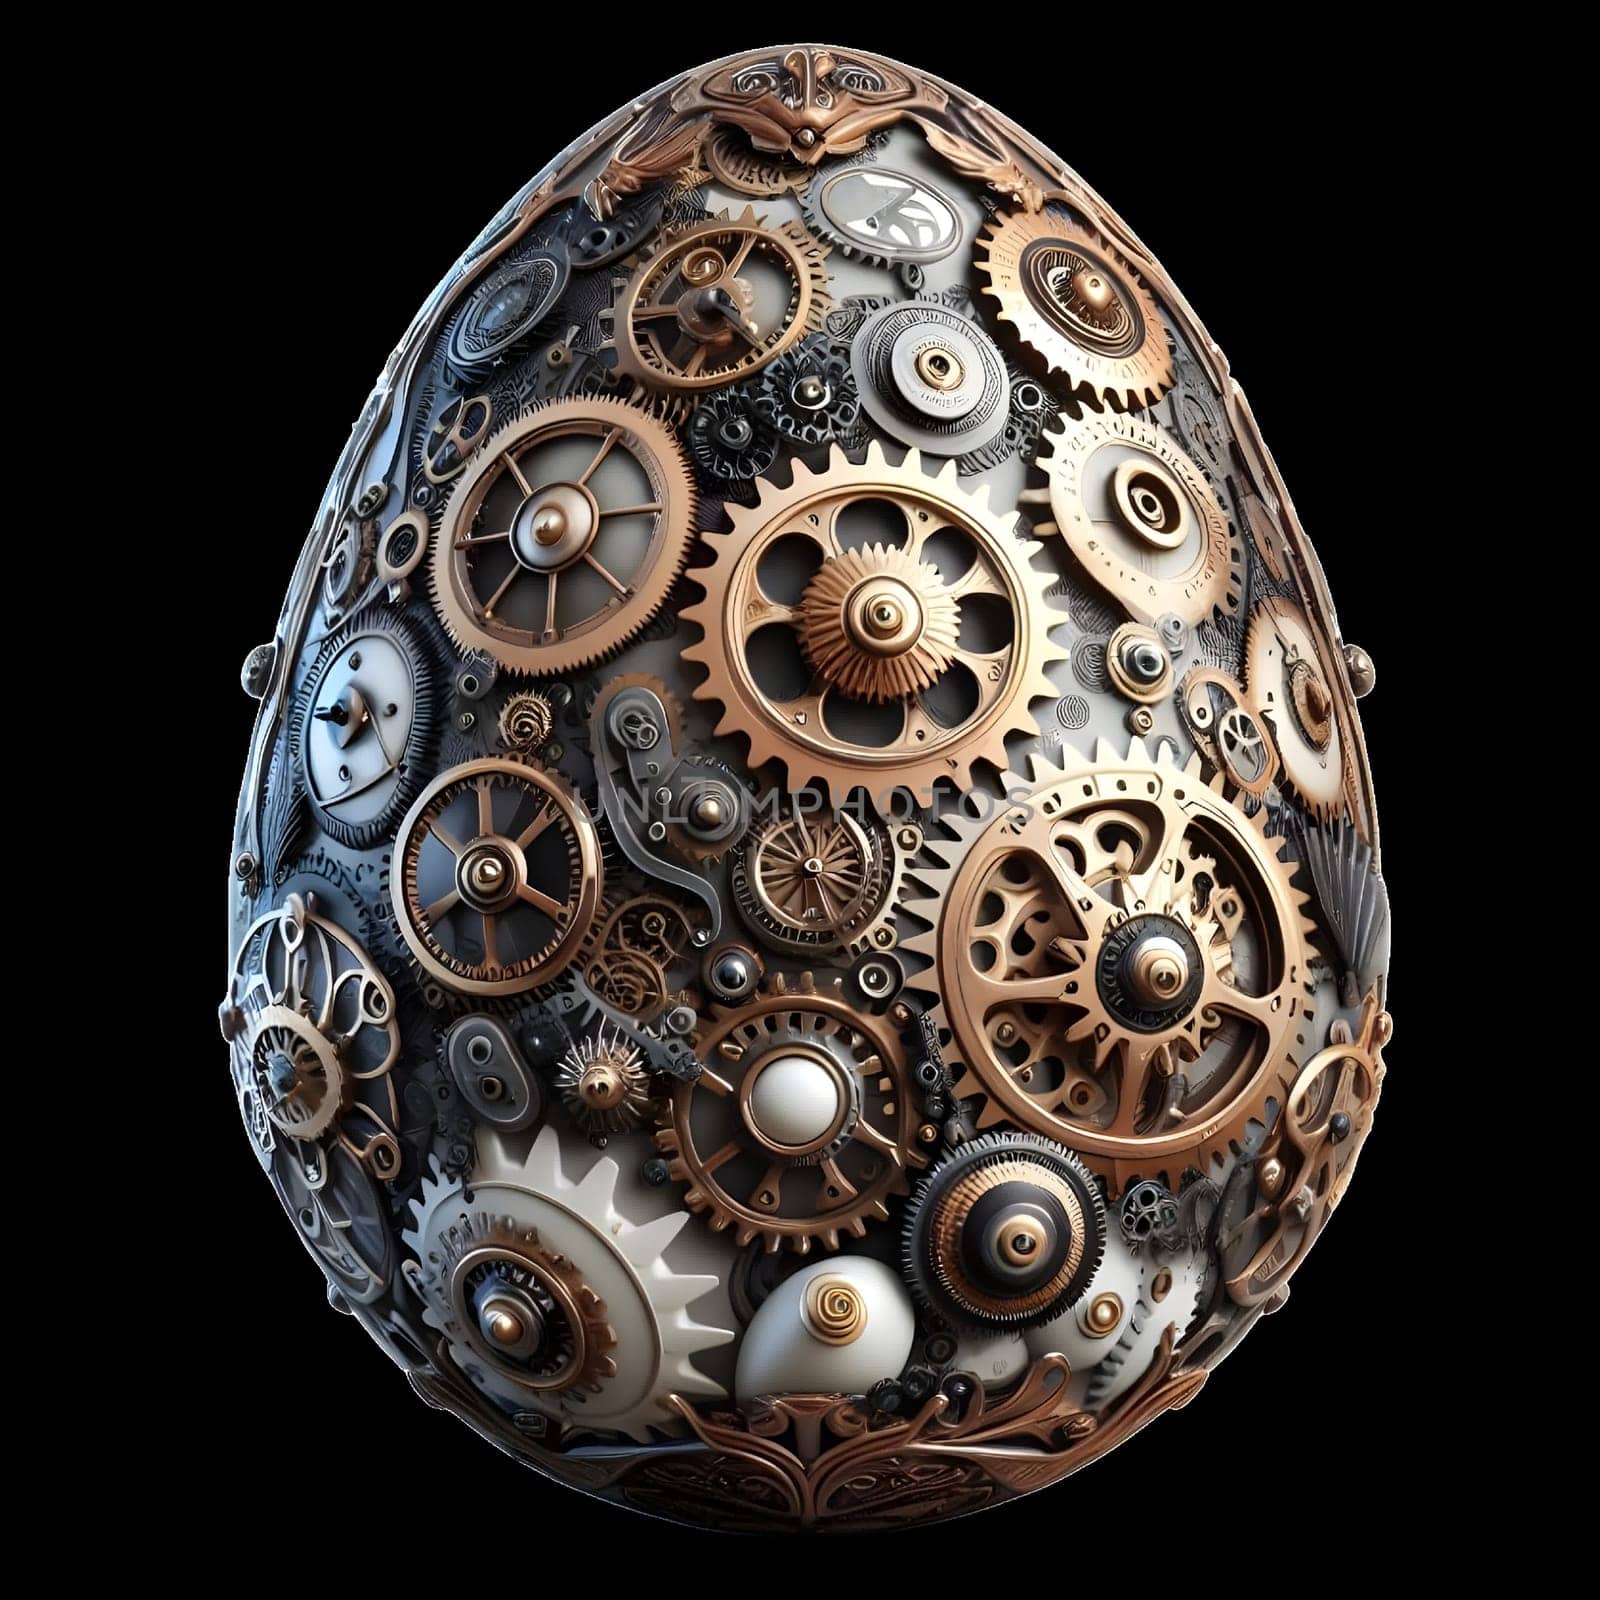 A luxurious easter egg, encrusted with sparkling jewels and intricate filigree, fit for royalty-free Jeweled Egg, Easter Egg, Paschal Egg, Jewelry Art, Home Decor, Art Collectible, OOAK Gifts. High quality photo